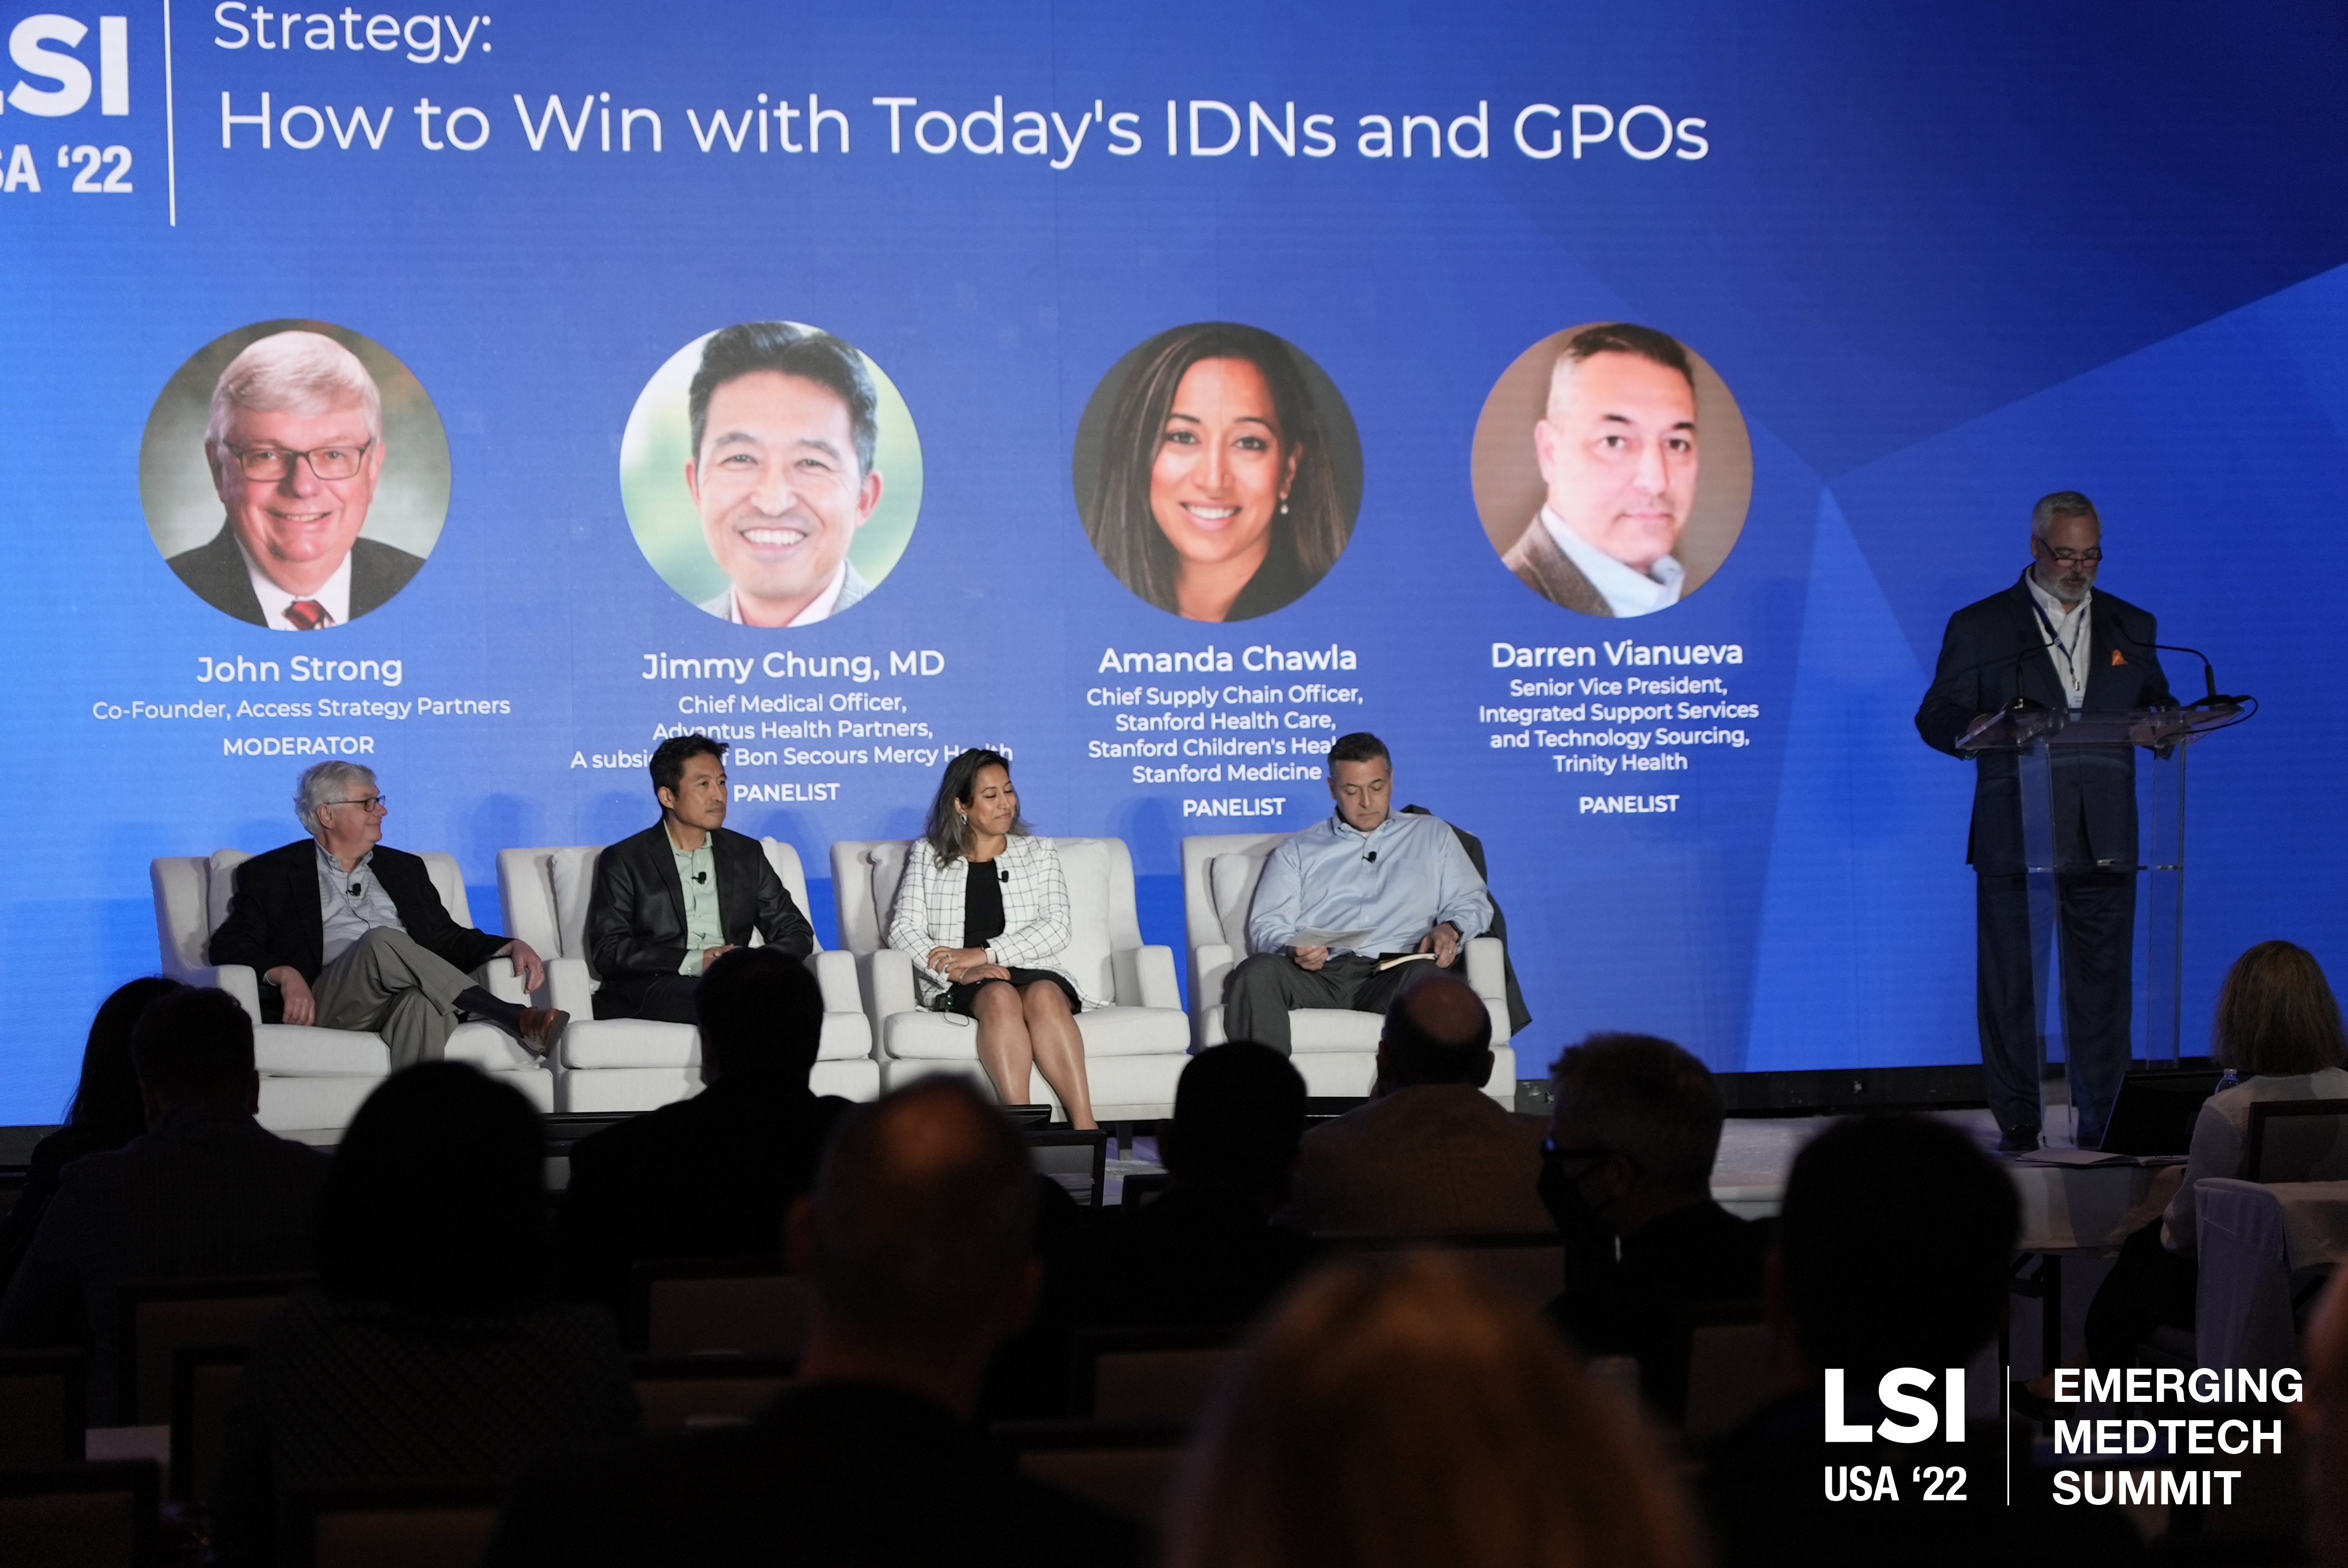 Strategy: How to Win with Today’s IDNs and GPOs